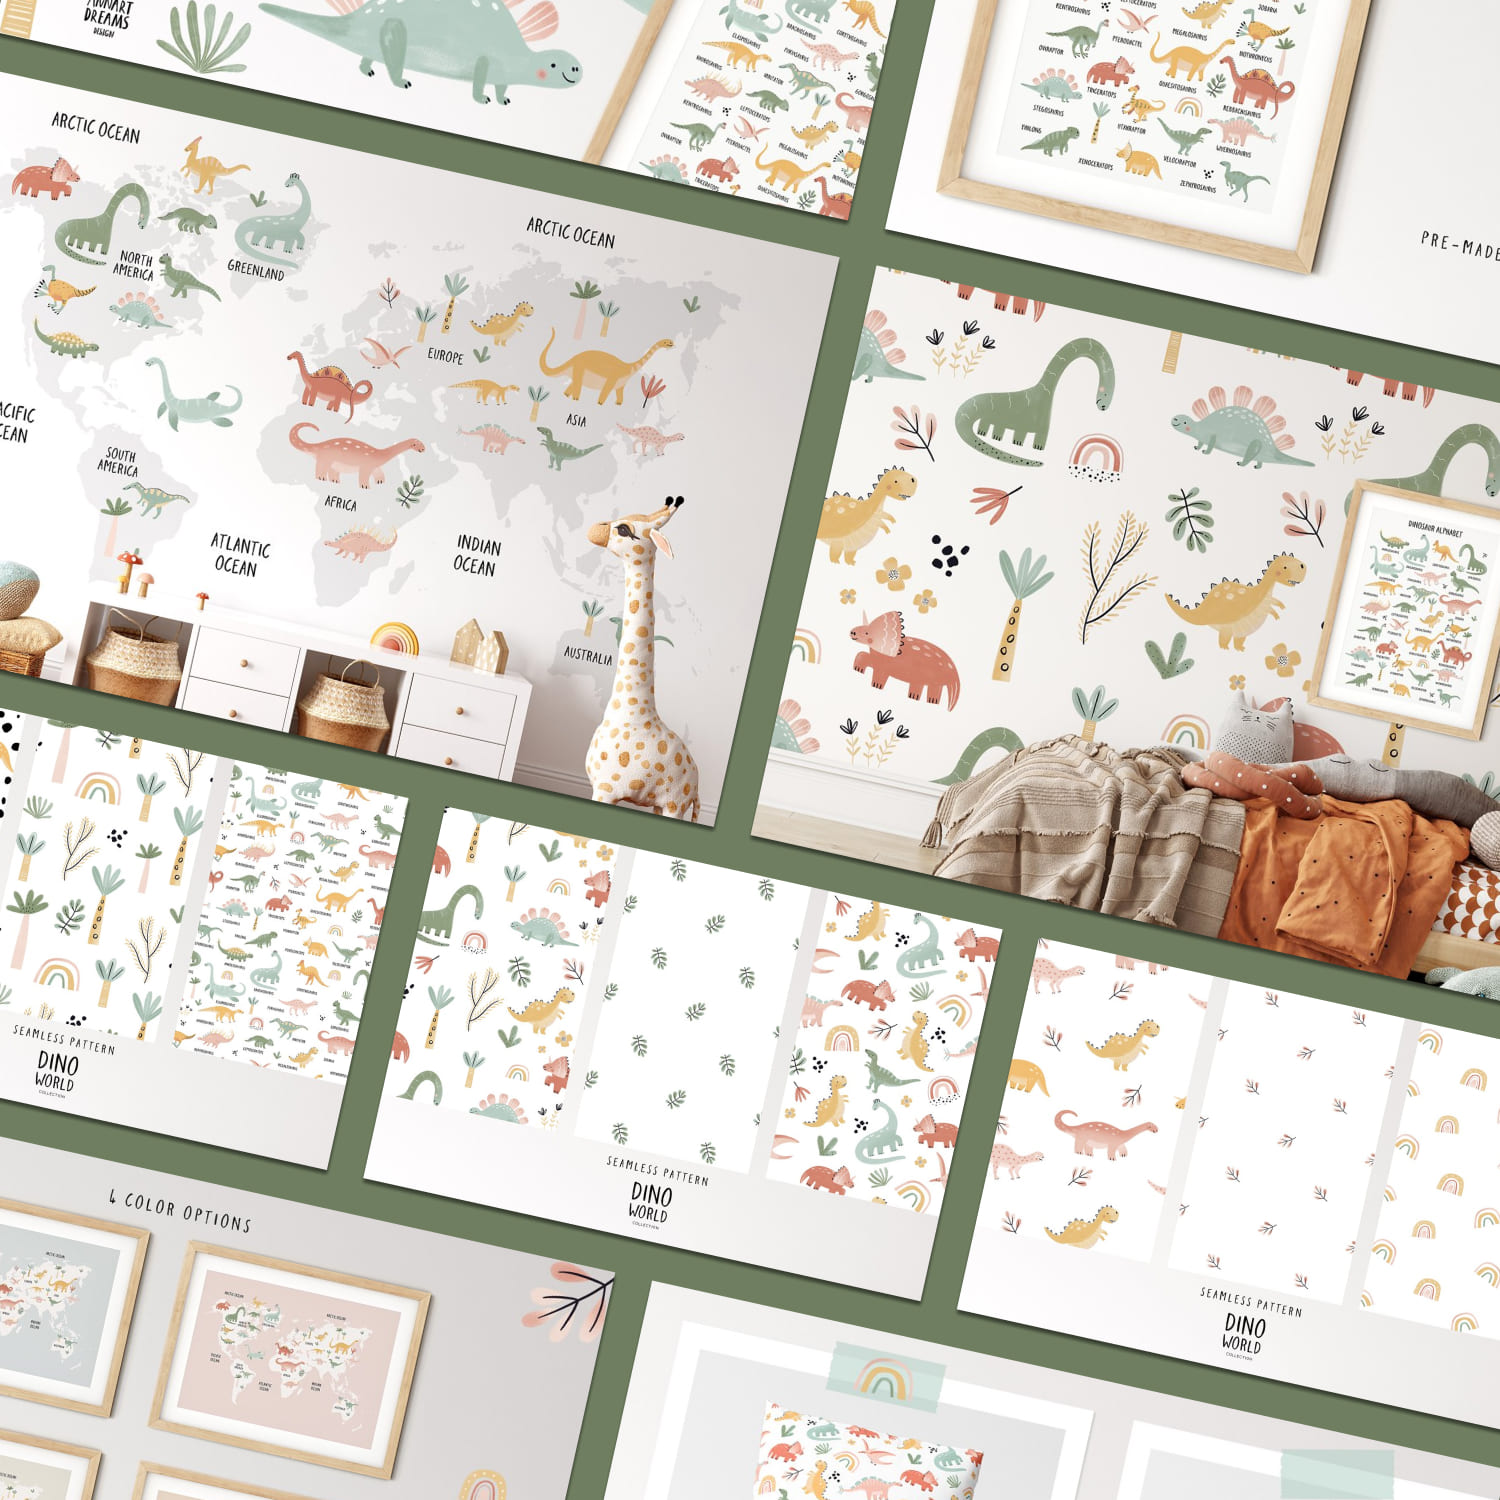 Dino World. Patterns, Alphabet, Map preview image.